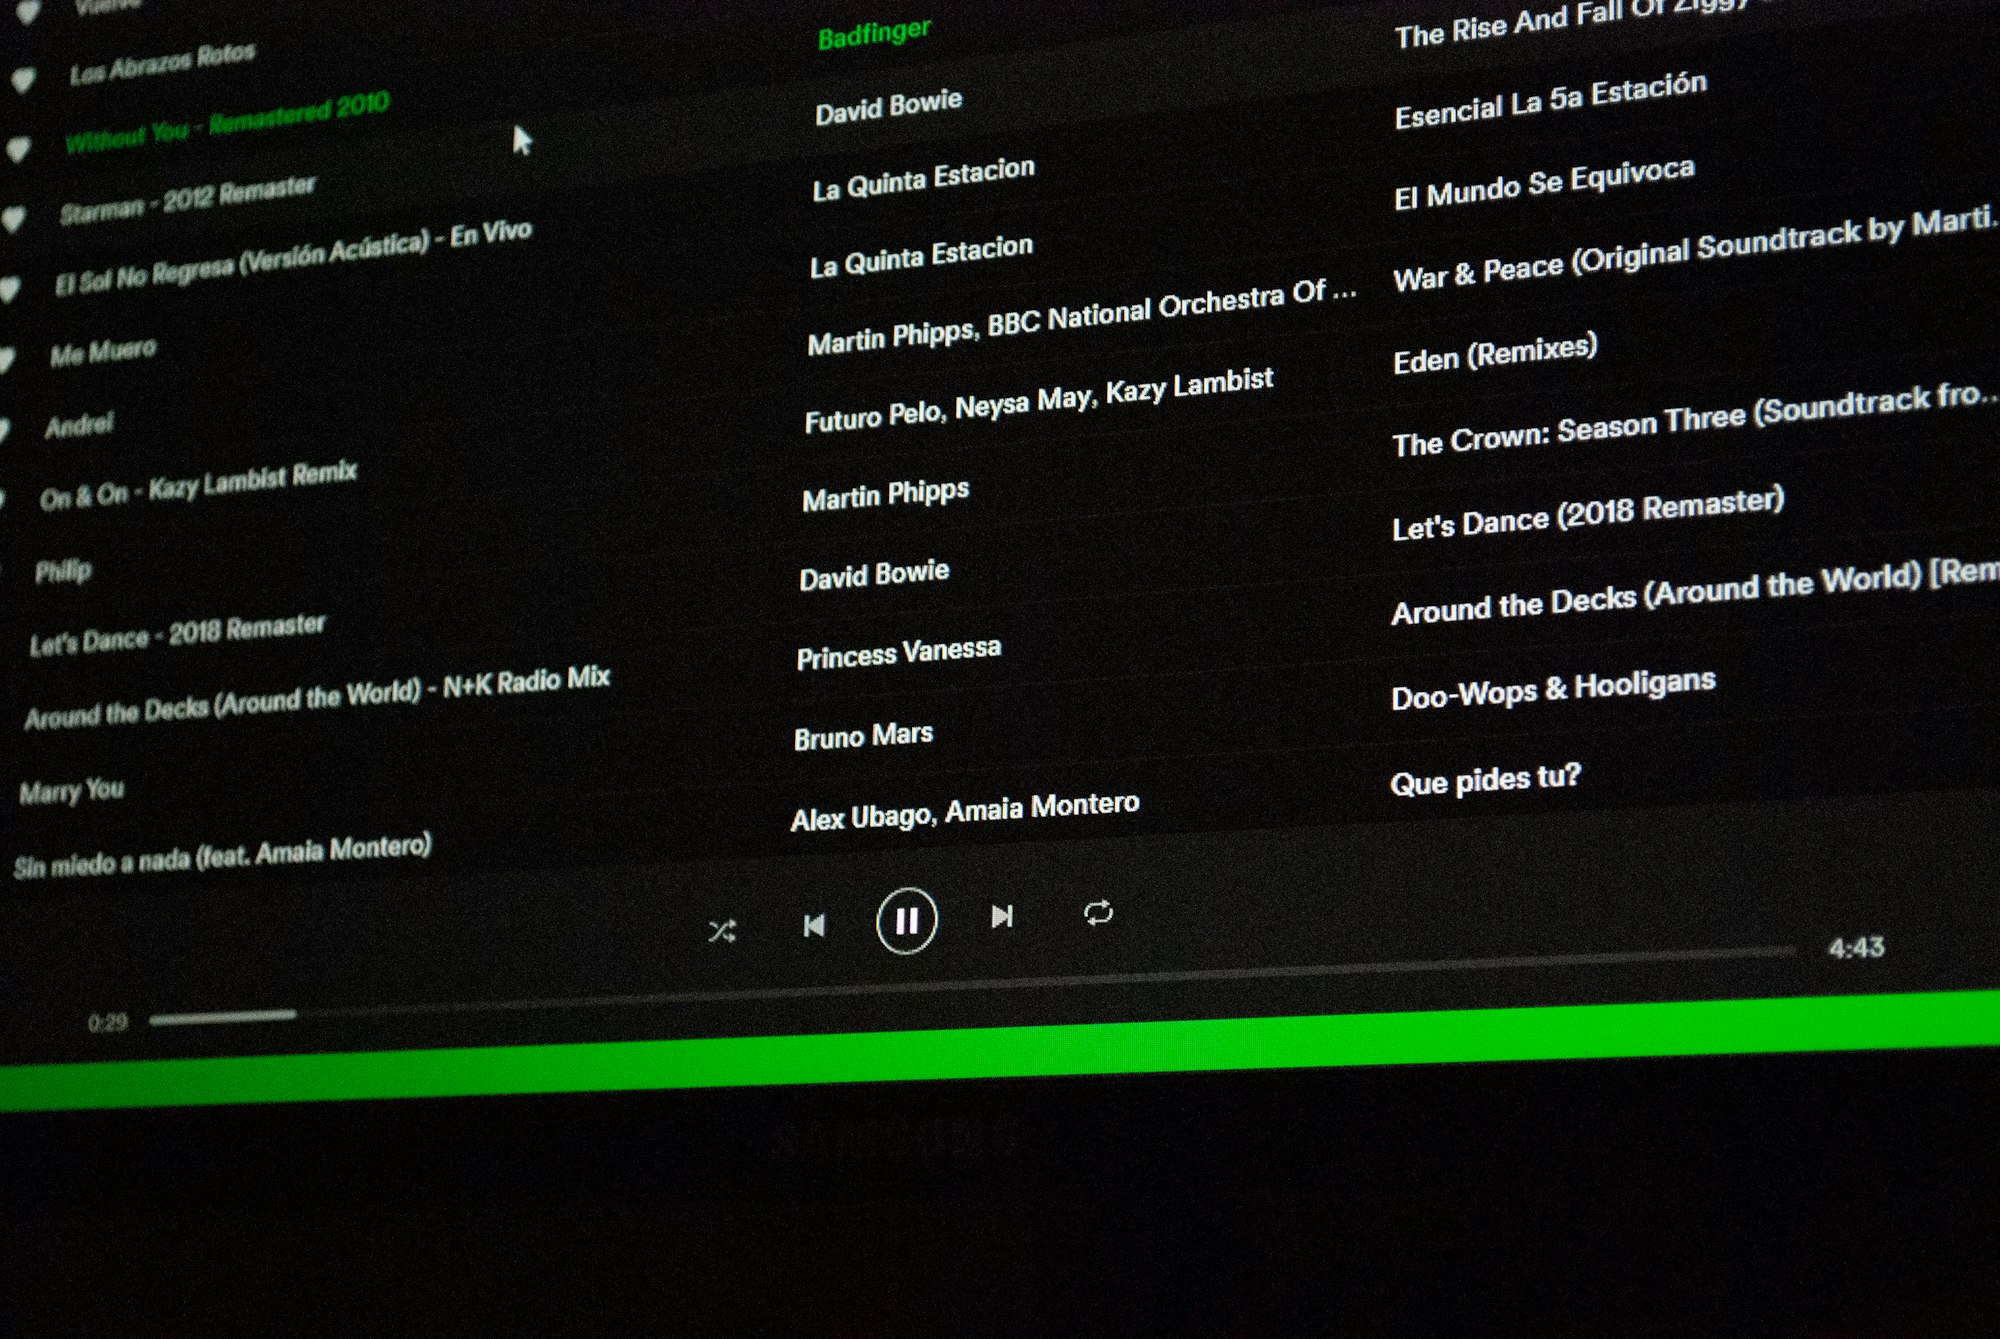 2024 New] Turn Off Spotify Smart Shuffle with/without Premium